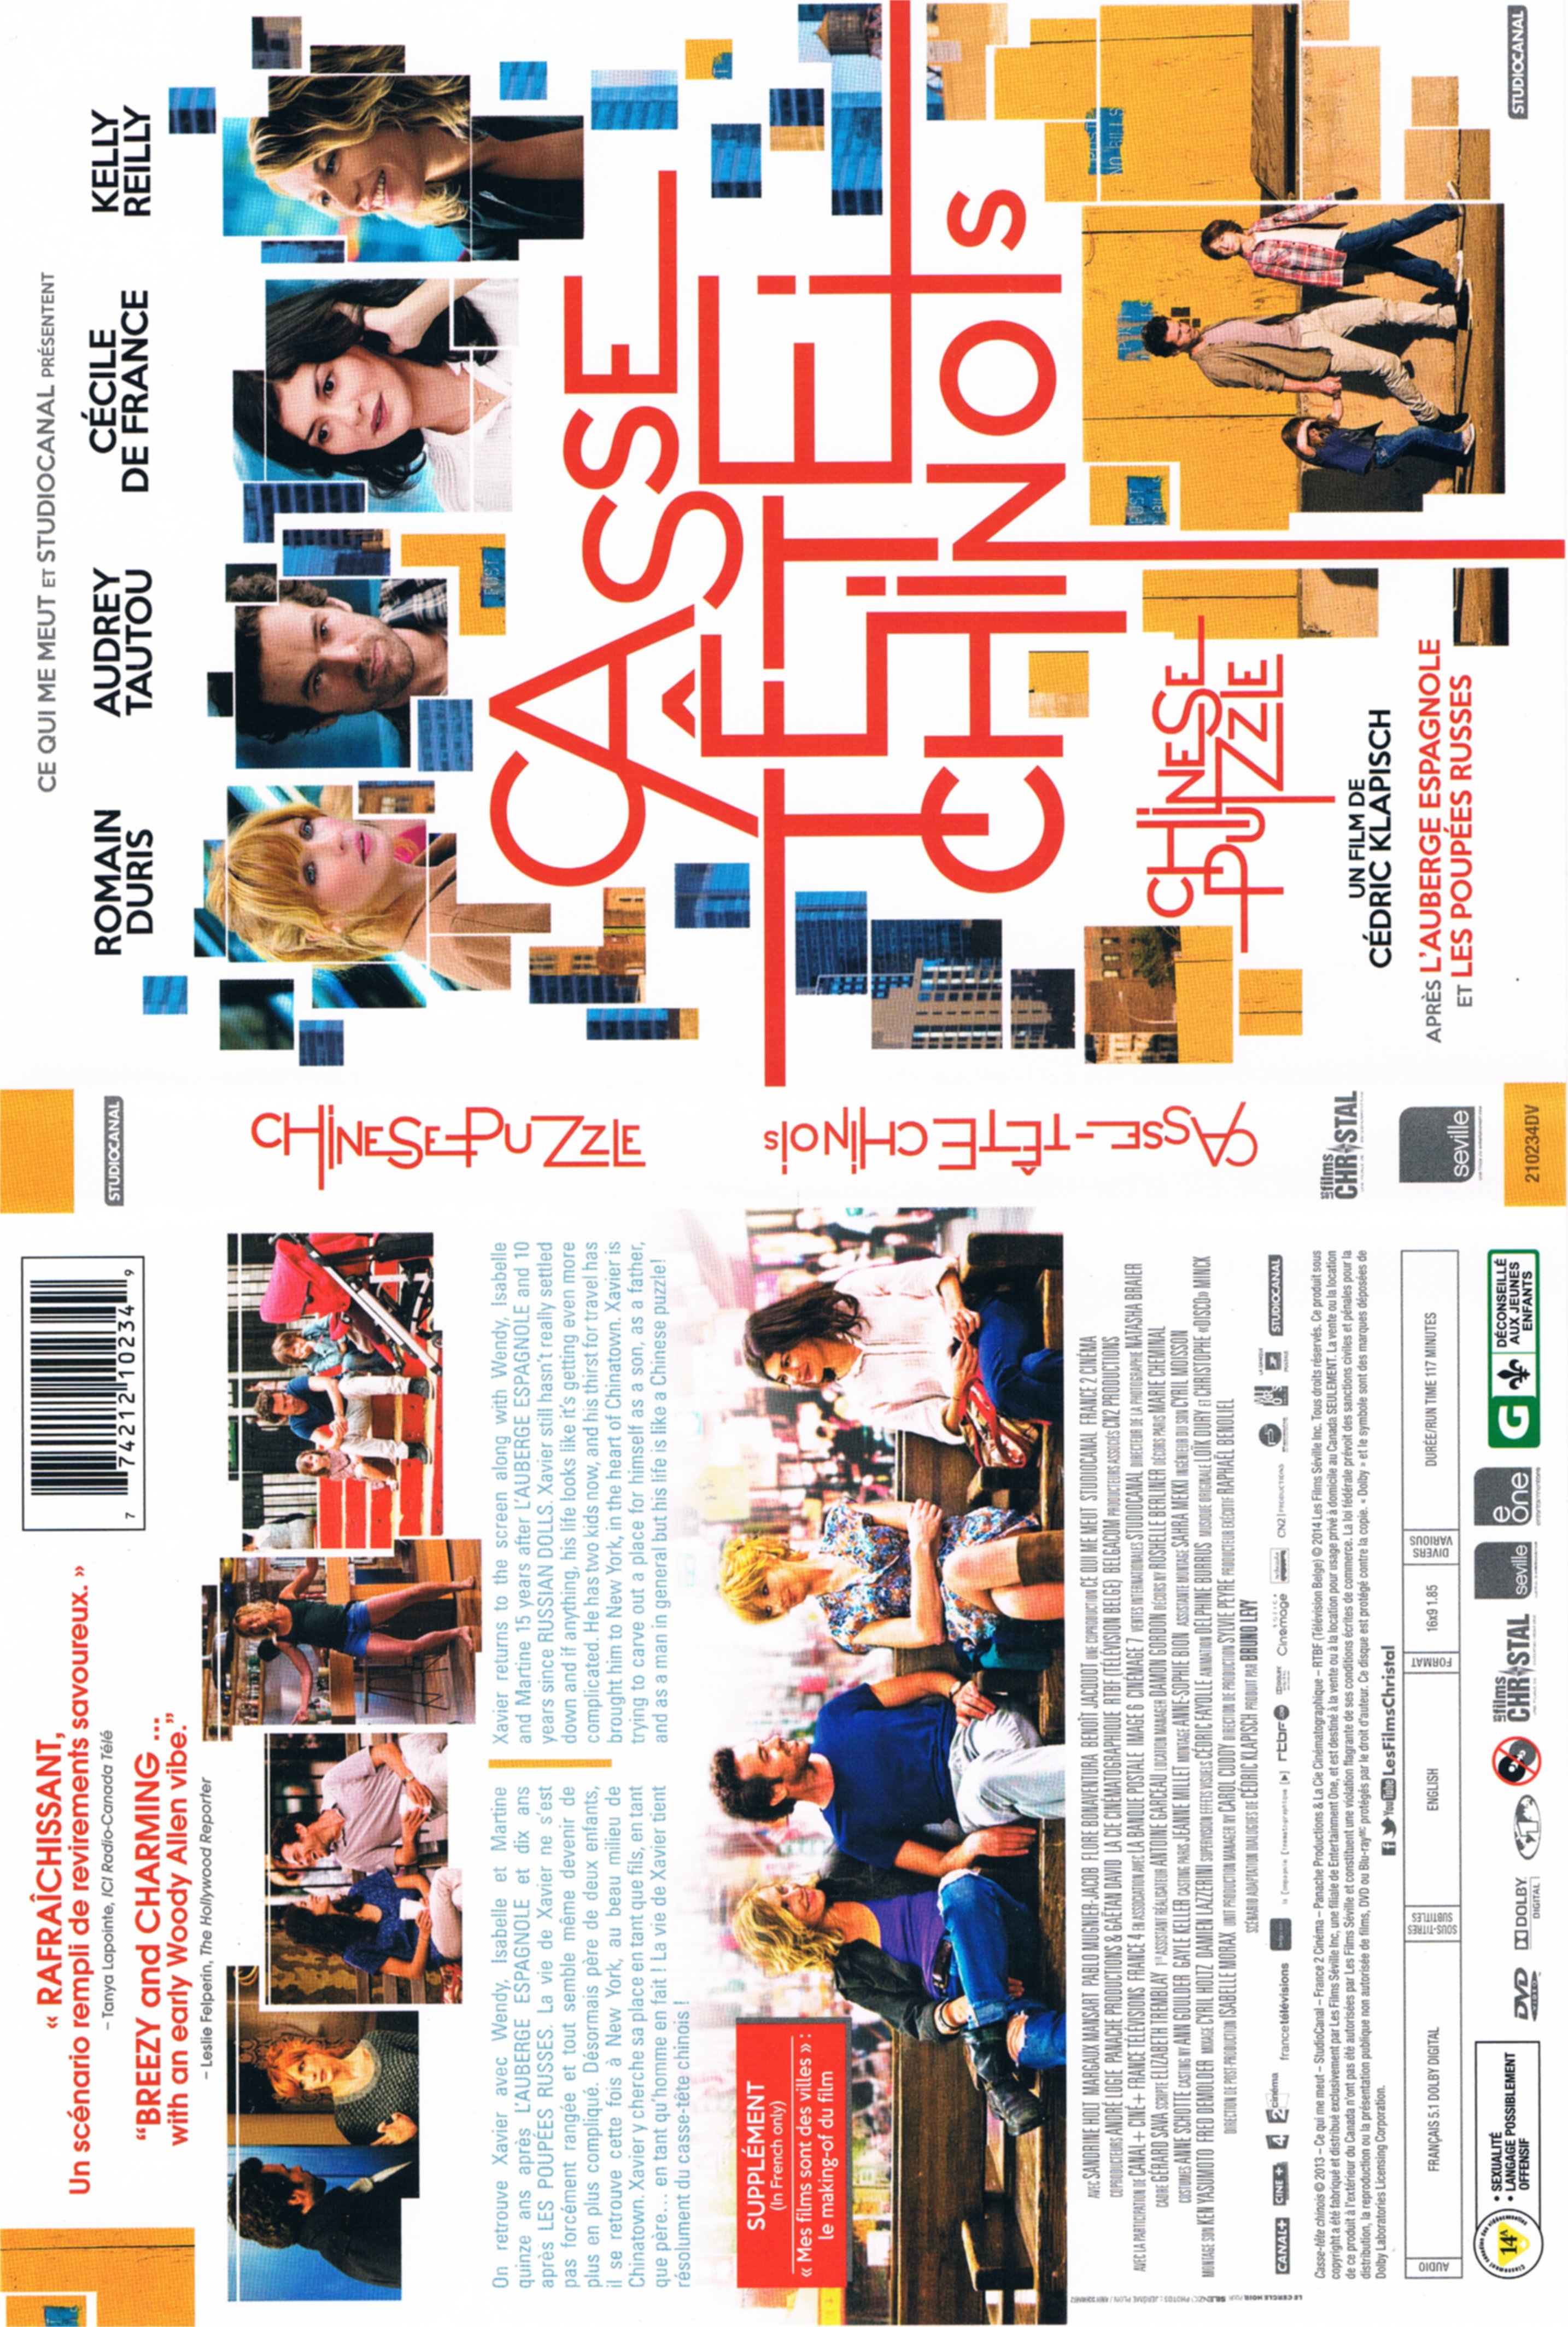 Jaquette DVD Casse-tte chinois - Chinese puzzel (Canadienne)